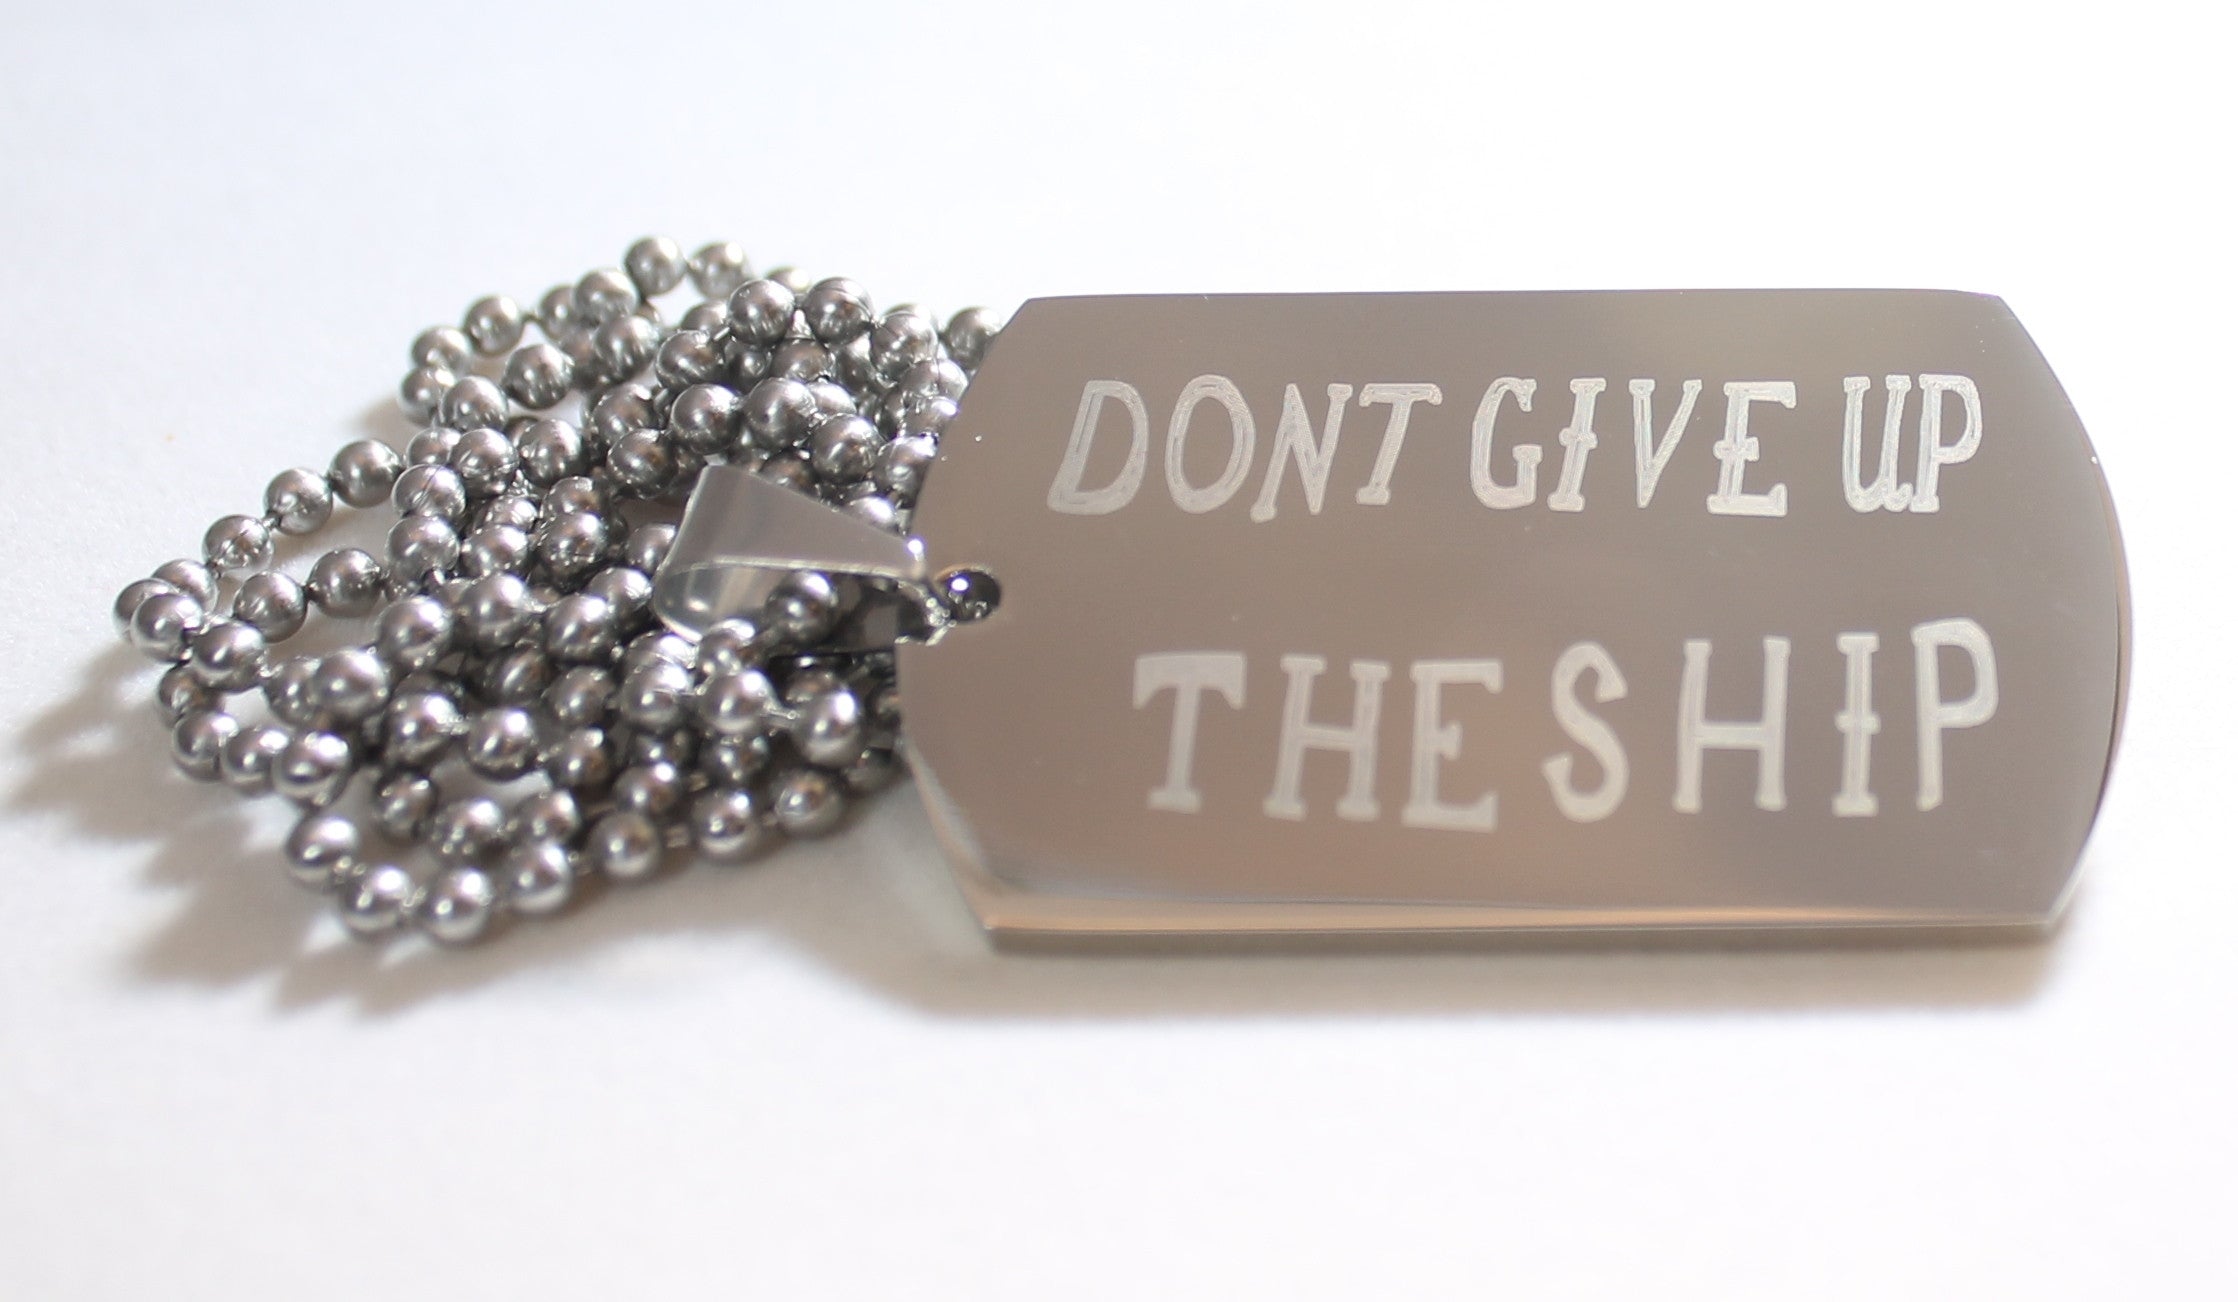 DONT GIVE UP THE SHIP NAVY MILITARY MOTIVATIONAL THICK STAINLESS STEEL DOG TAG - Samstagsandmore